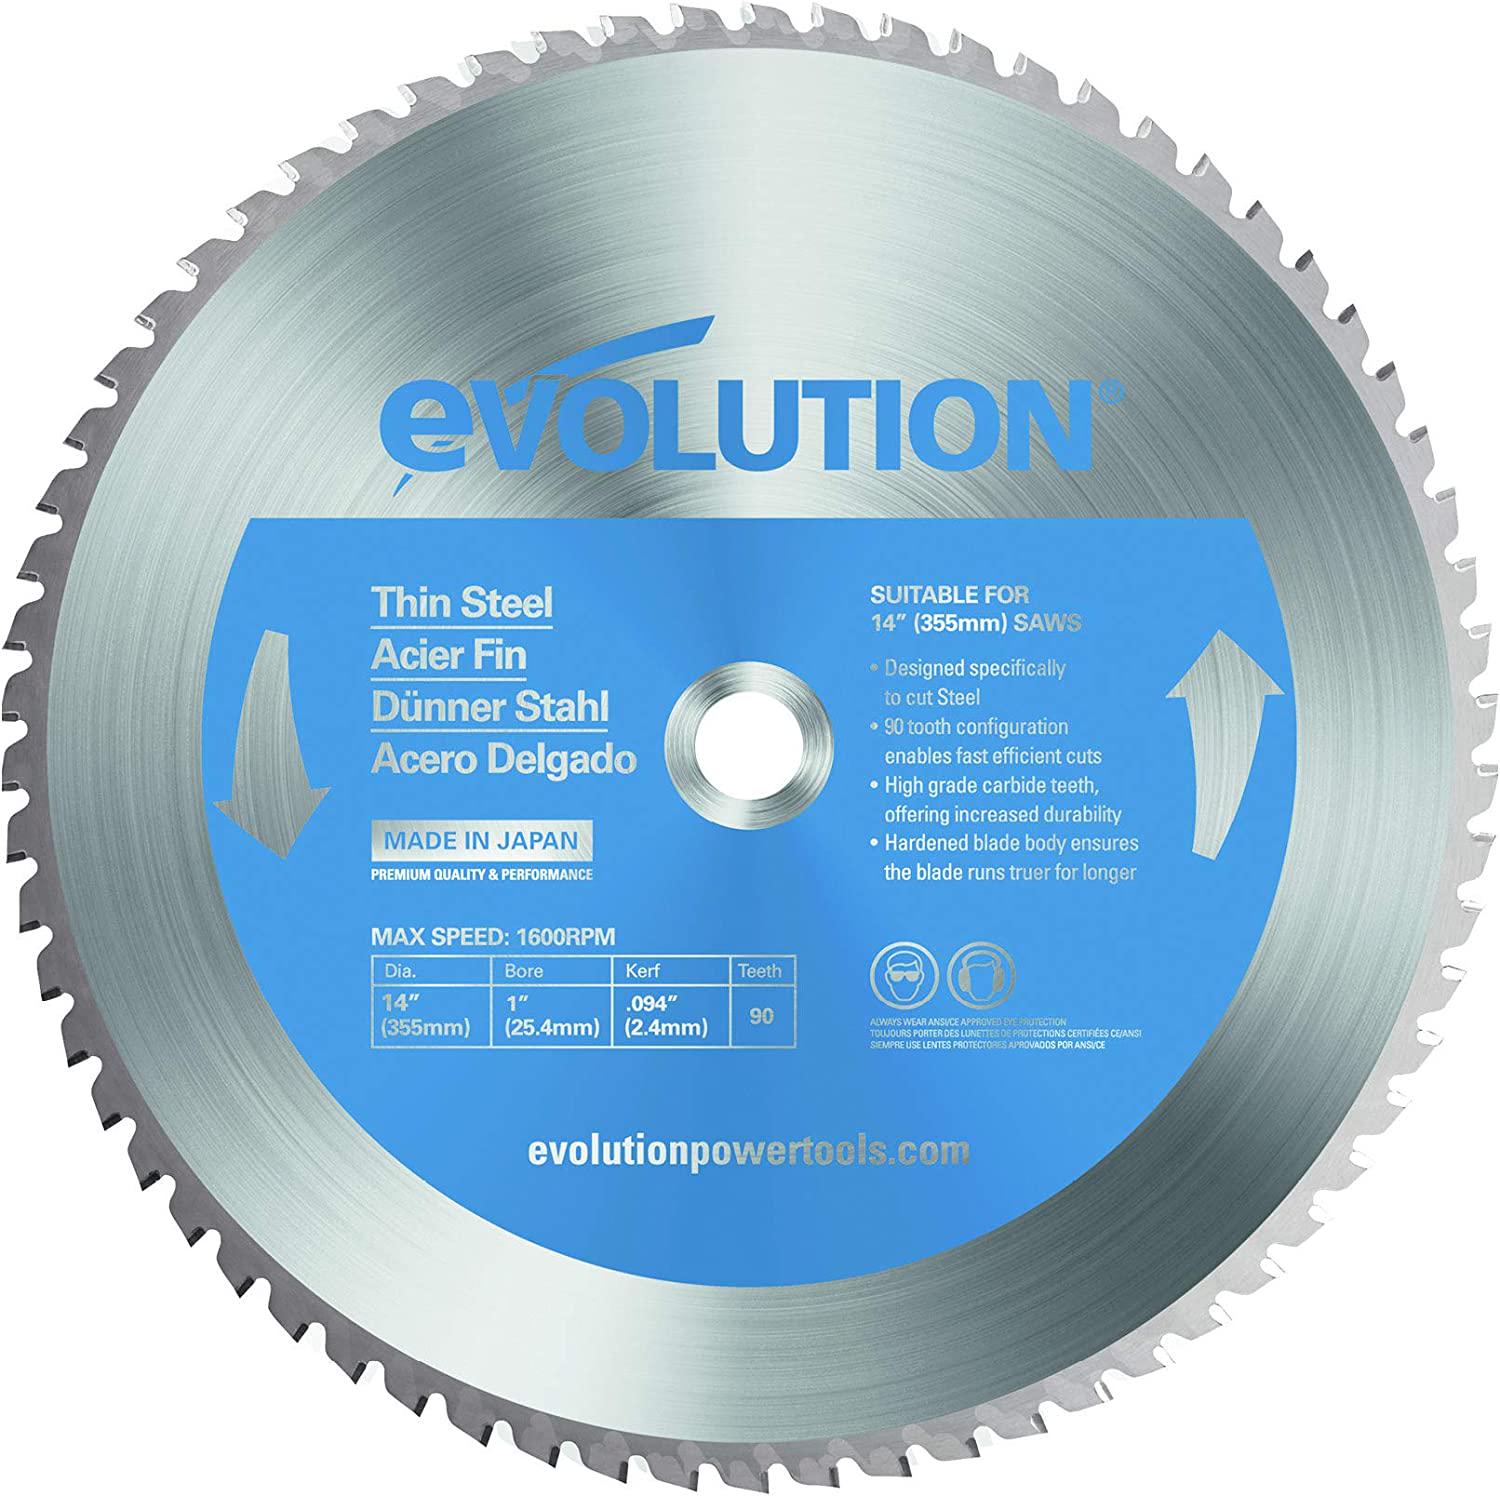 Evolution, Evolution (T355TCT-90CS) - 355 mm Circular Saw Blade (AKA TCT Saw Blade) For Cutting Thin Steel - Carbide Tipped Metal Saw Blade Produces Virtually No Heat, Burrs or Sparks